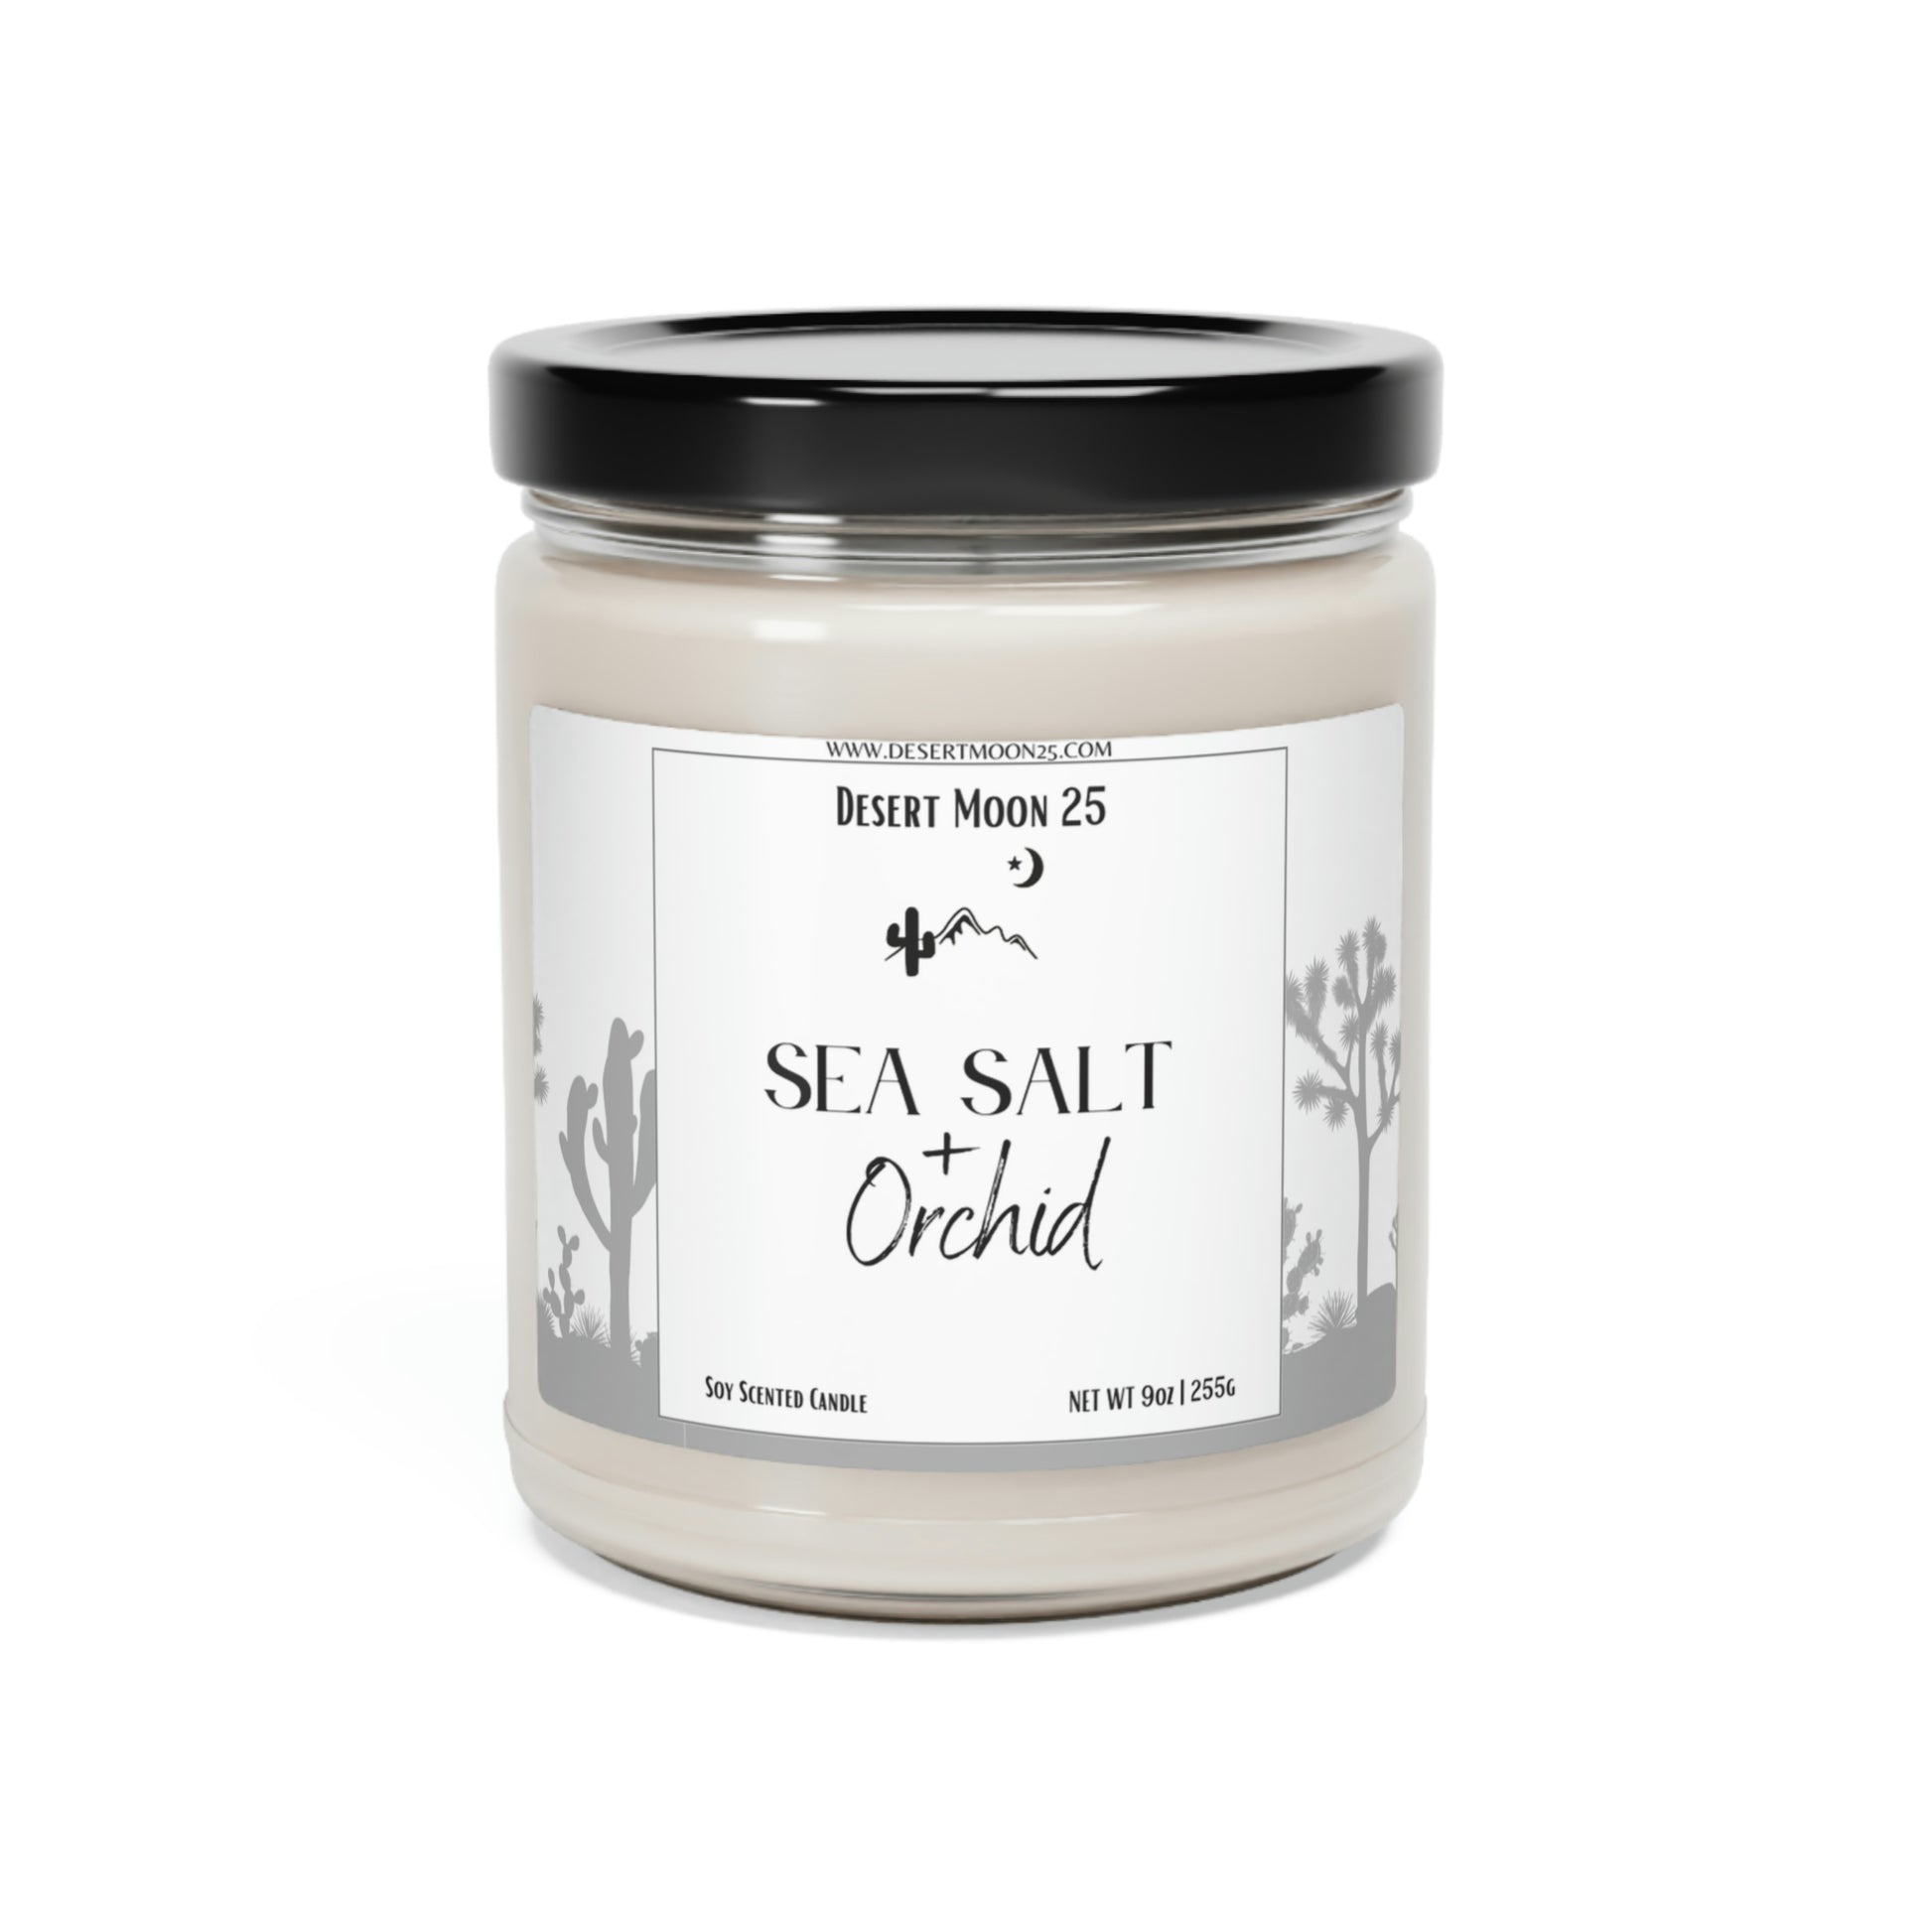 Scented Soy Candles, 9oz (5 Scents Available) - Desert Moon 25